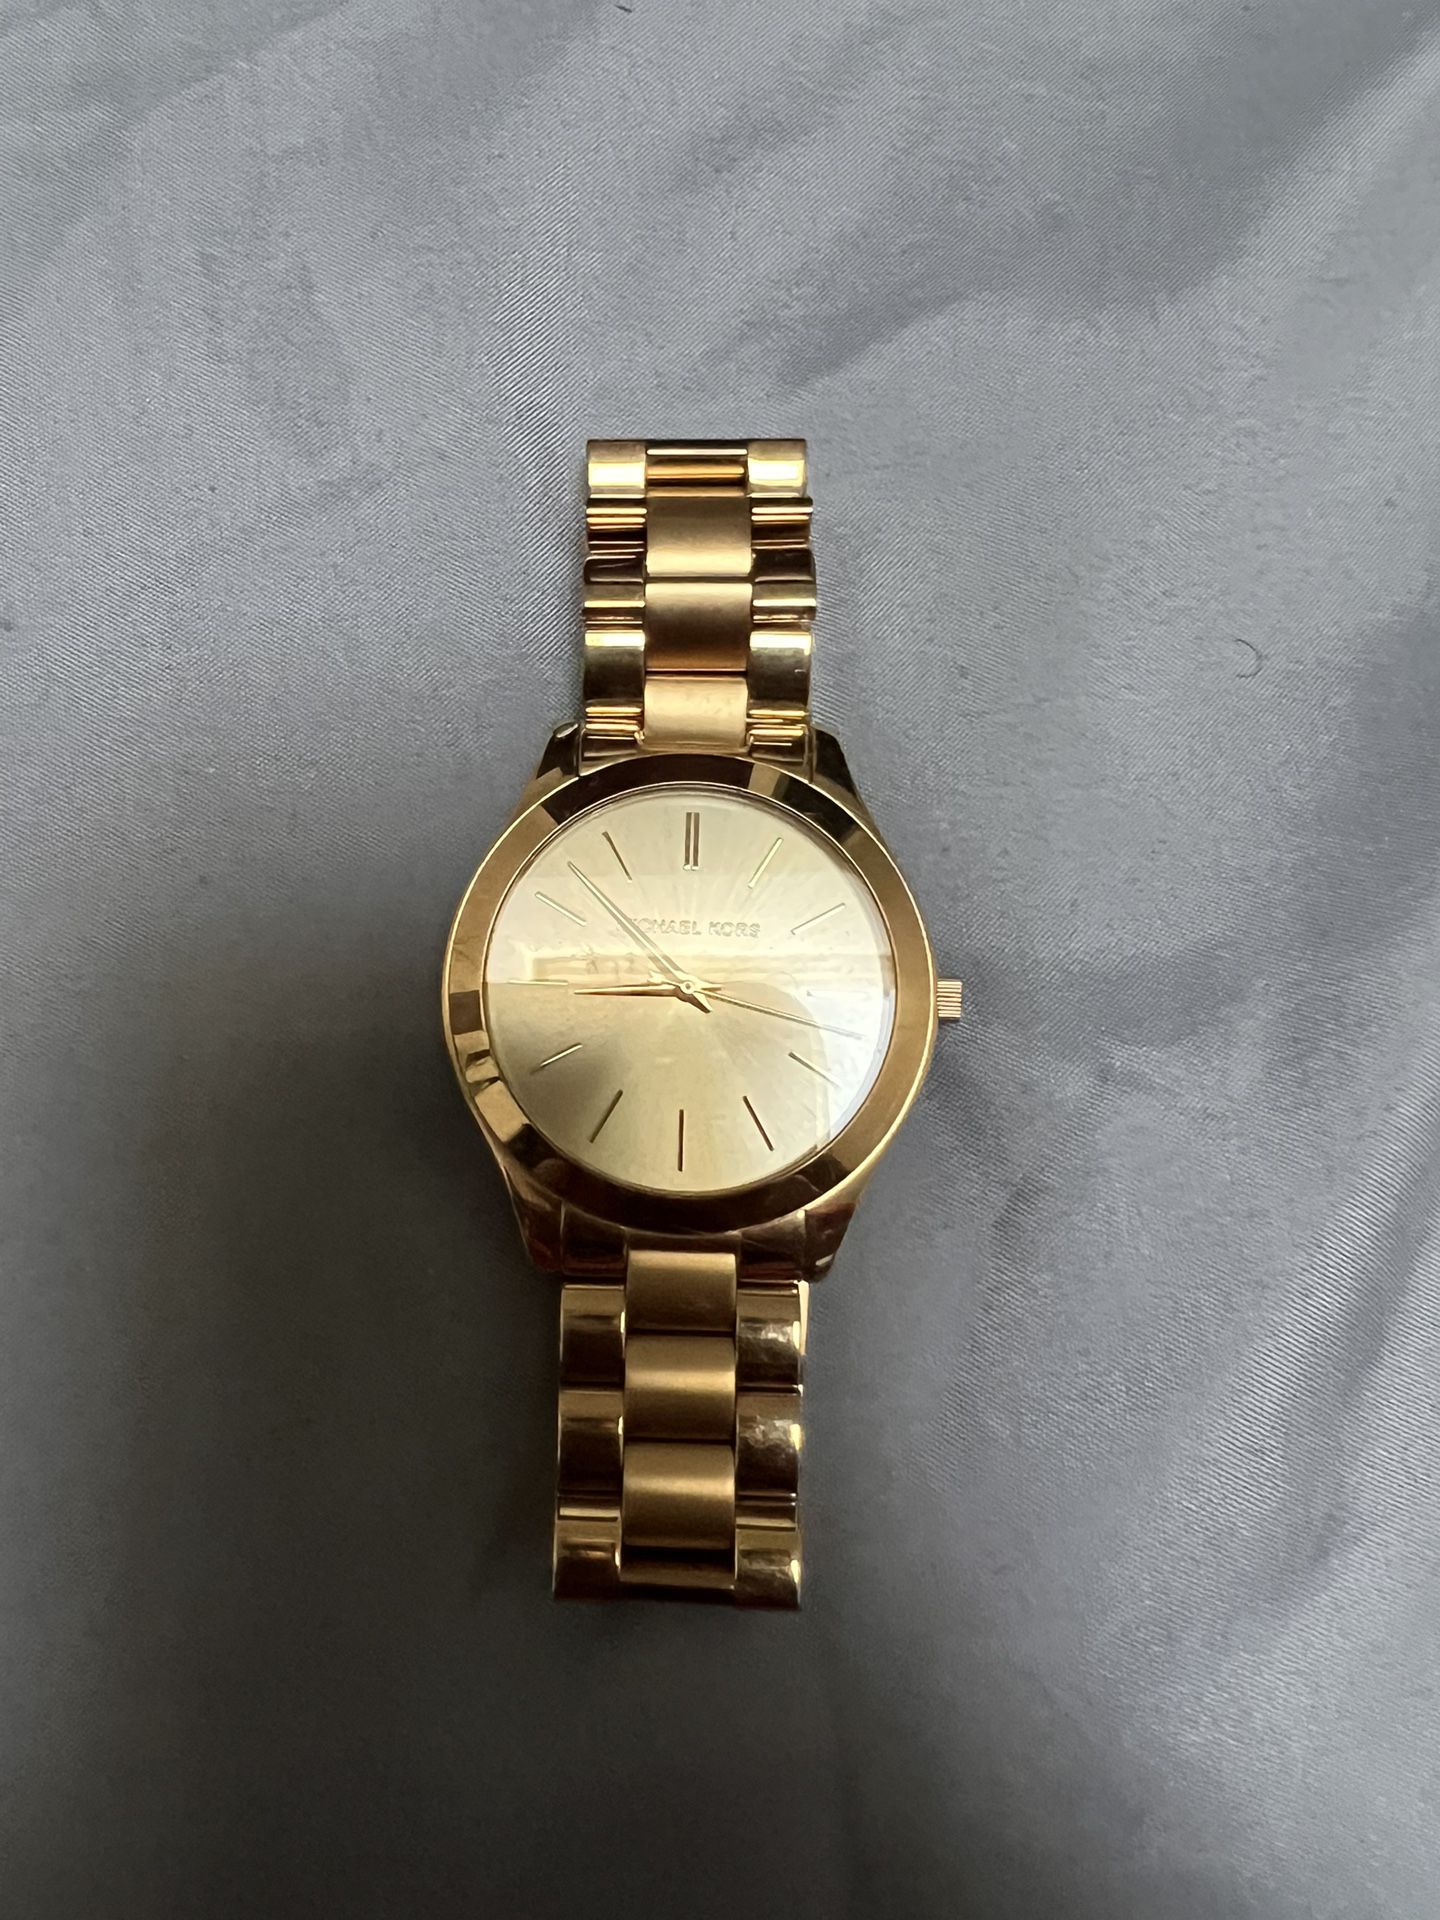 Gold Plated Michael Kors Watch for Sale in Brooklyn, NY - OfferUp